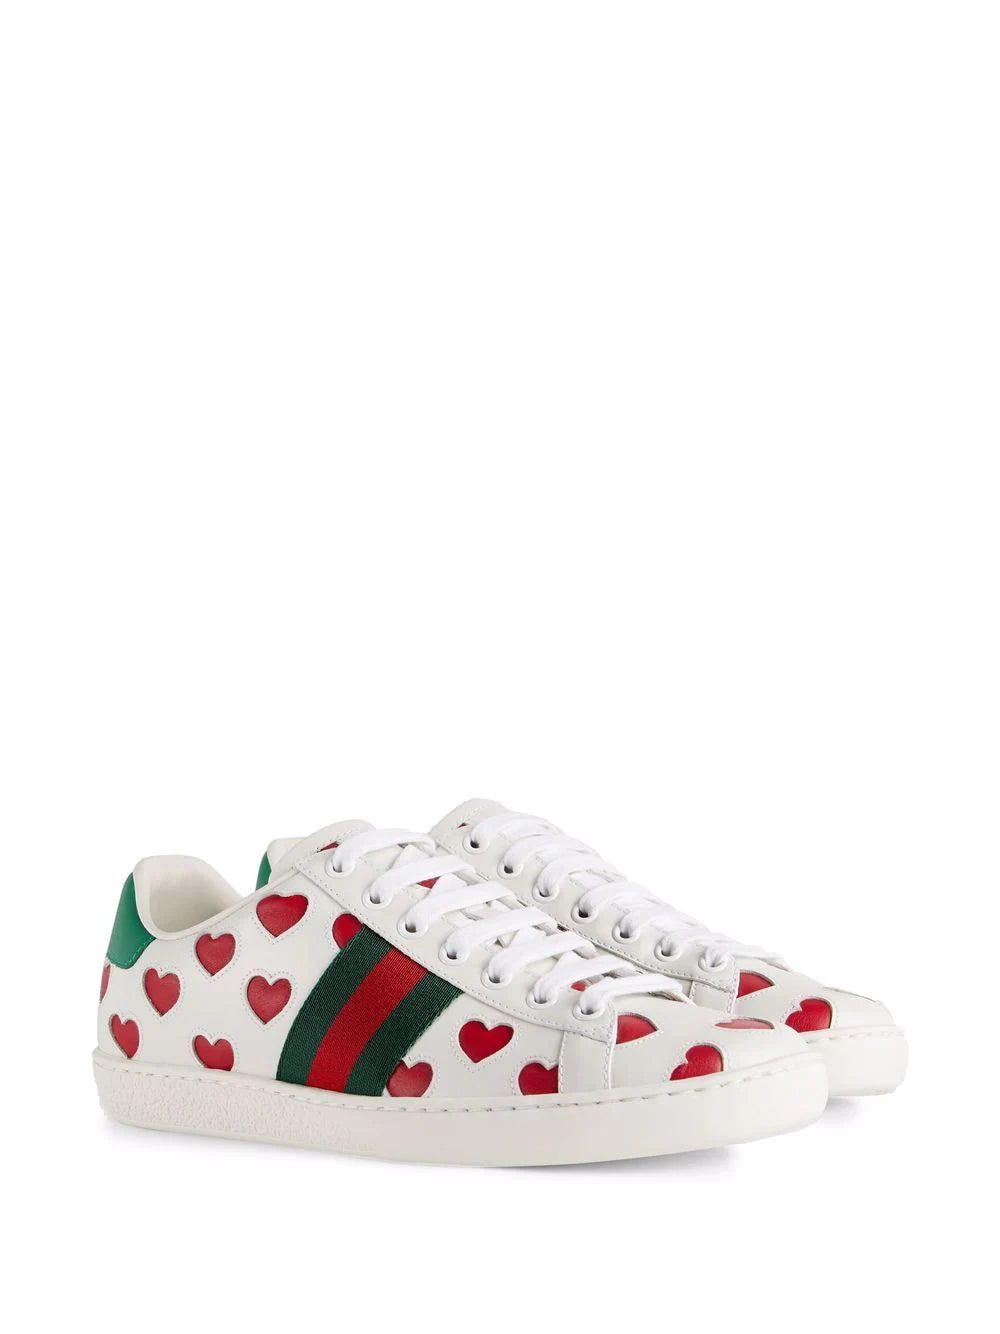 Gucci Ace lace-up sneakers